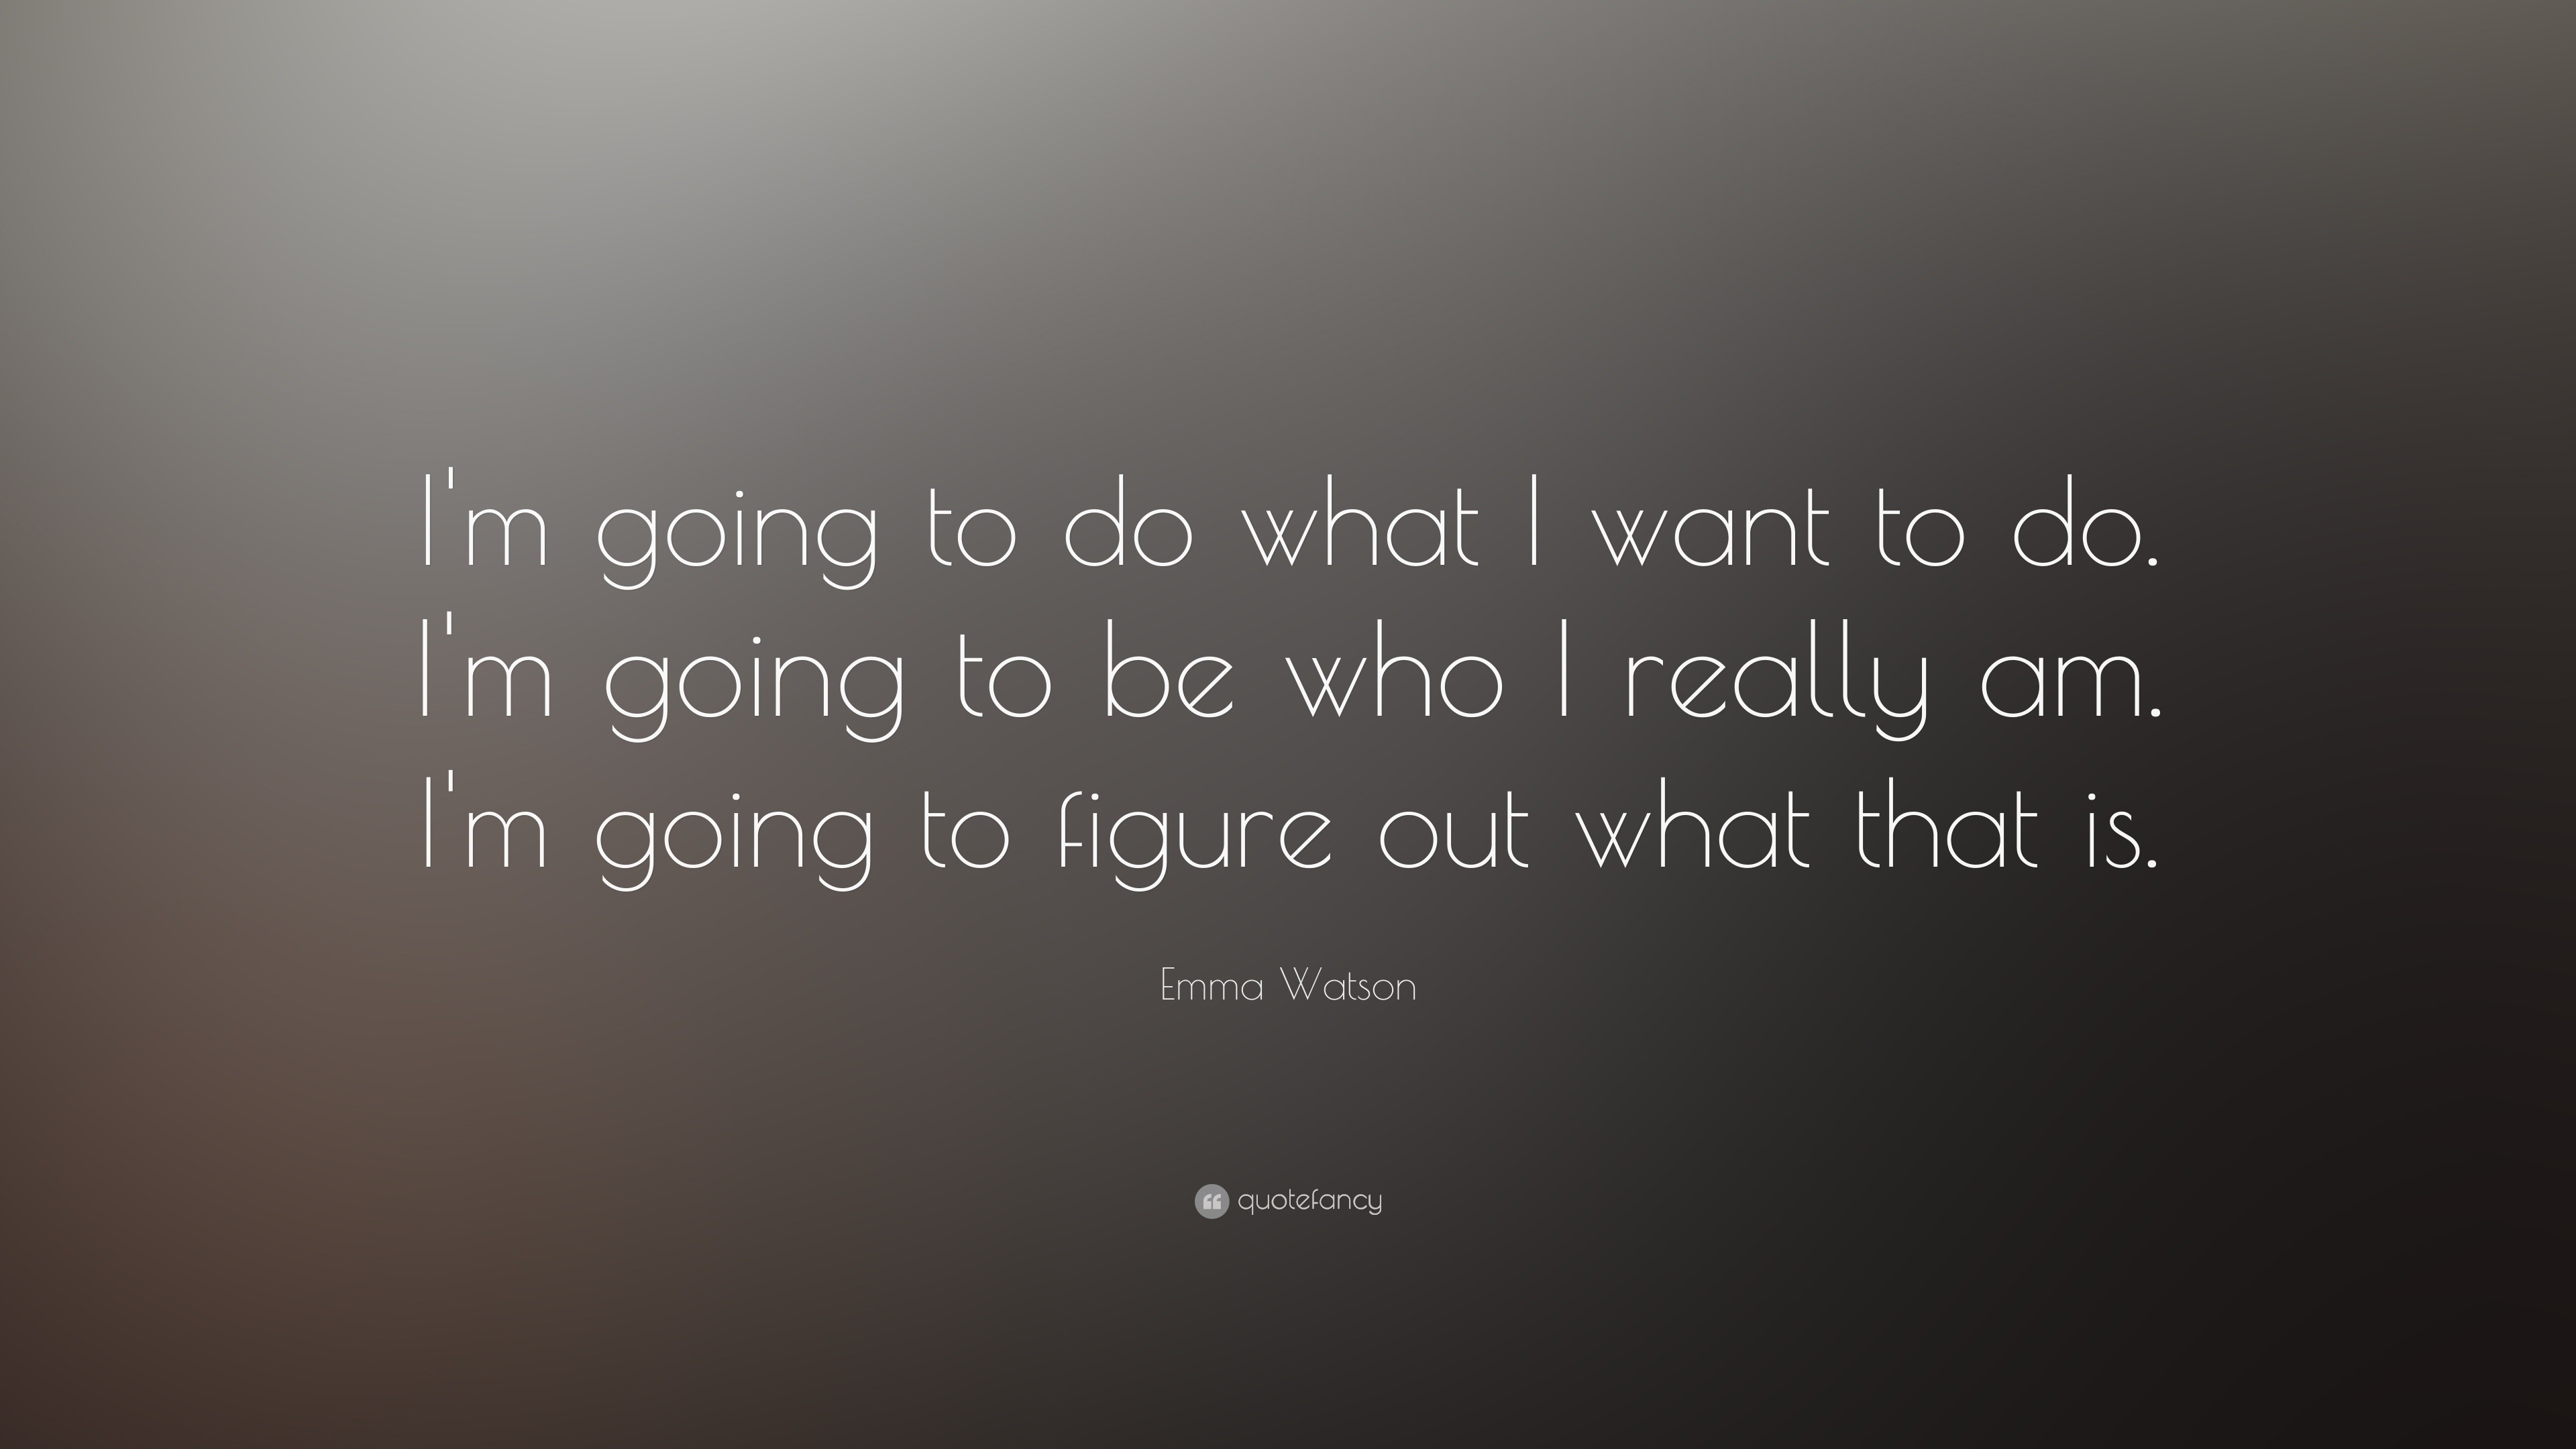 Emma Watson Quote “i M Going To Do What I Want To Do I M Going To Be Who I Really Am I M